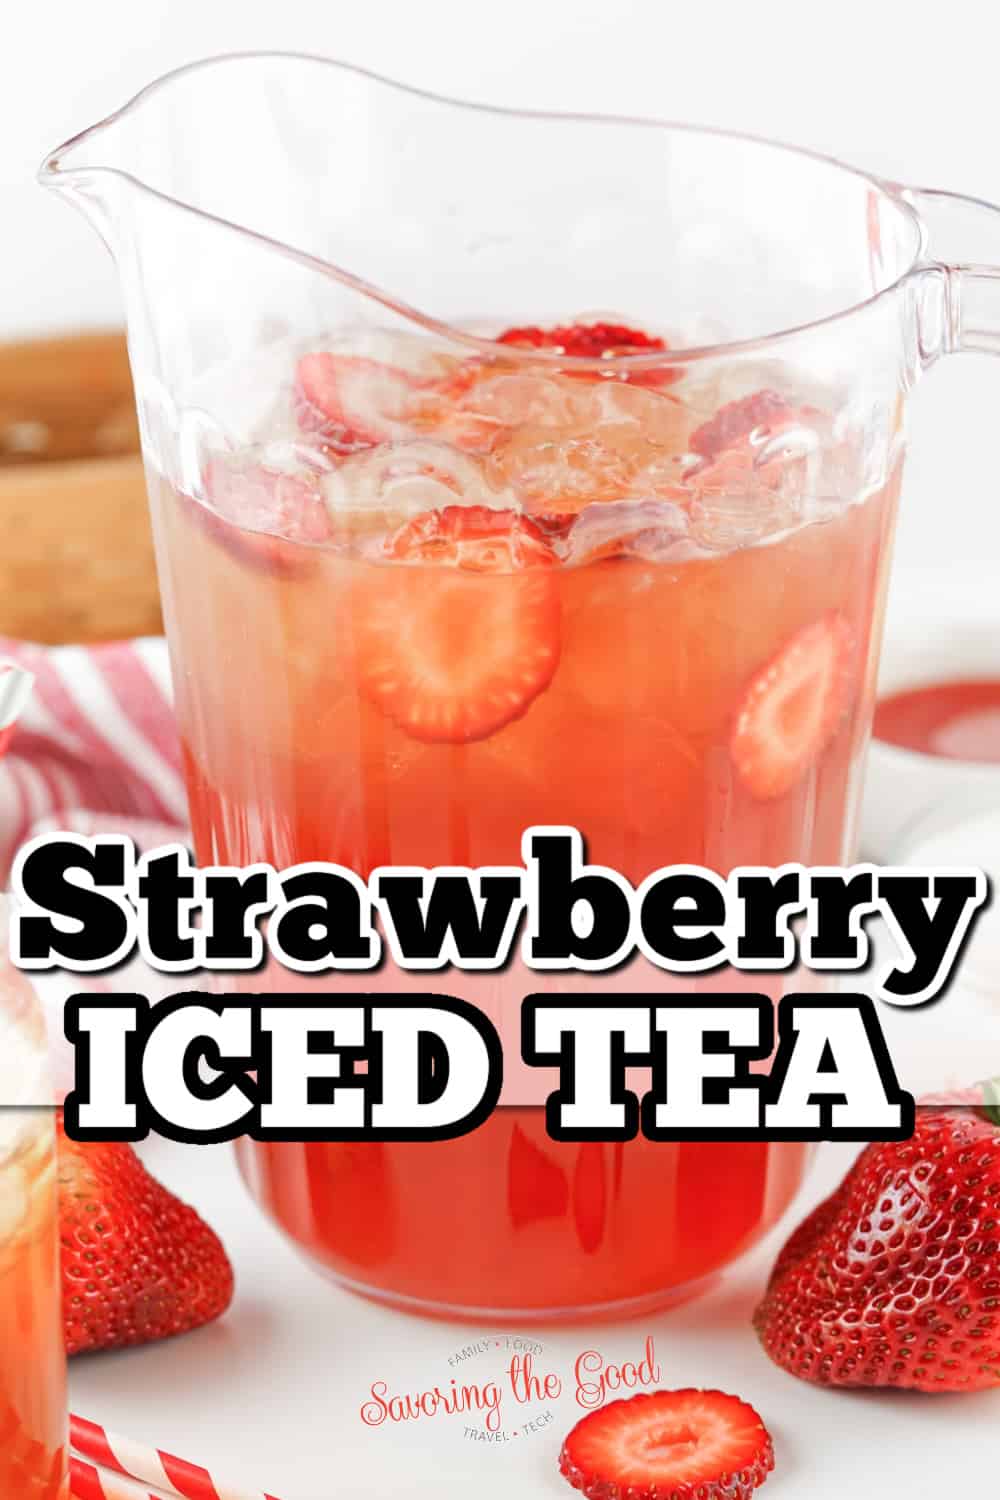 Strawberry iced tea in a pitcher with strawberries.